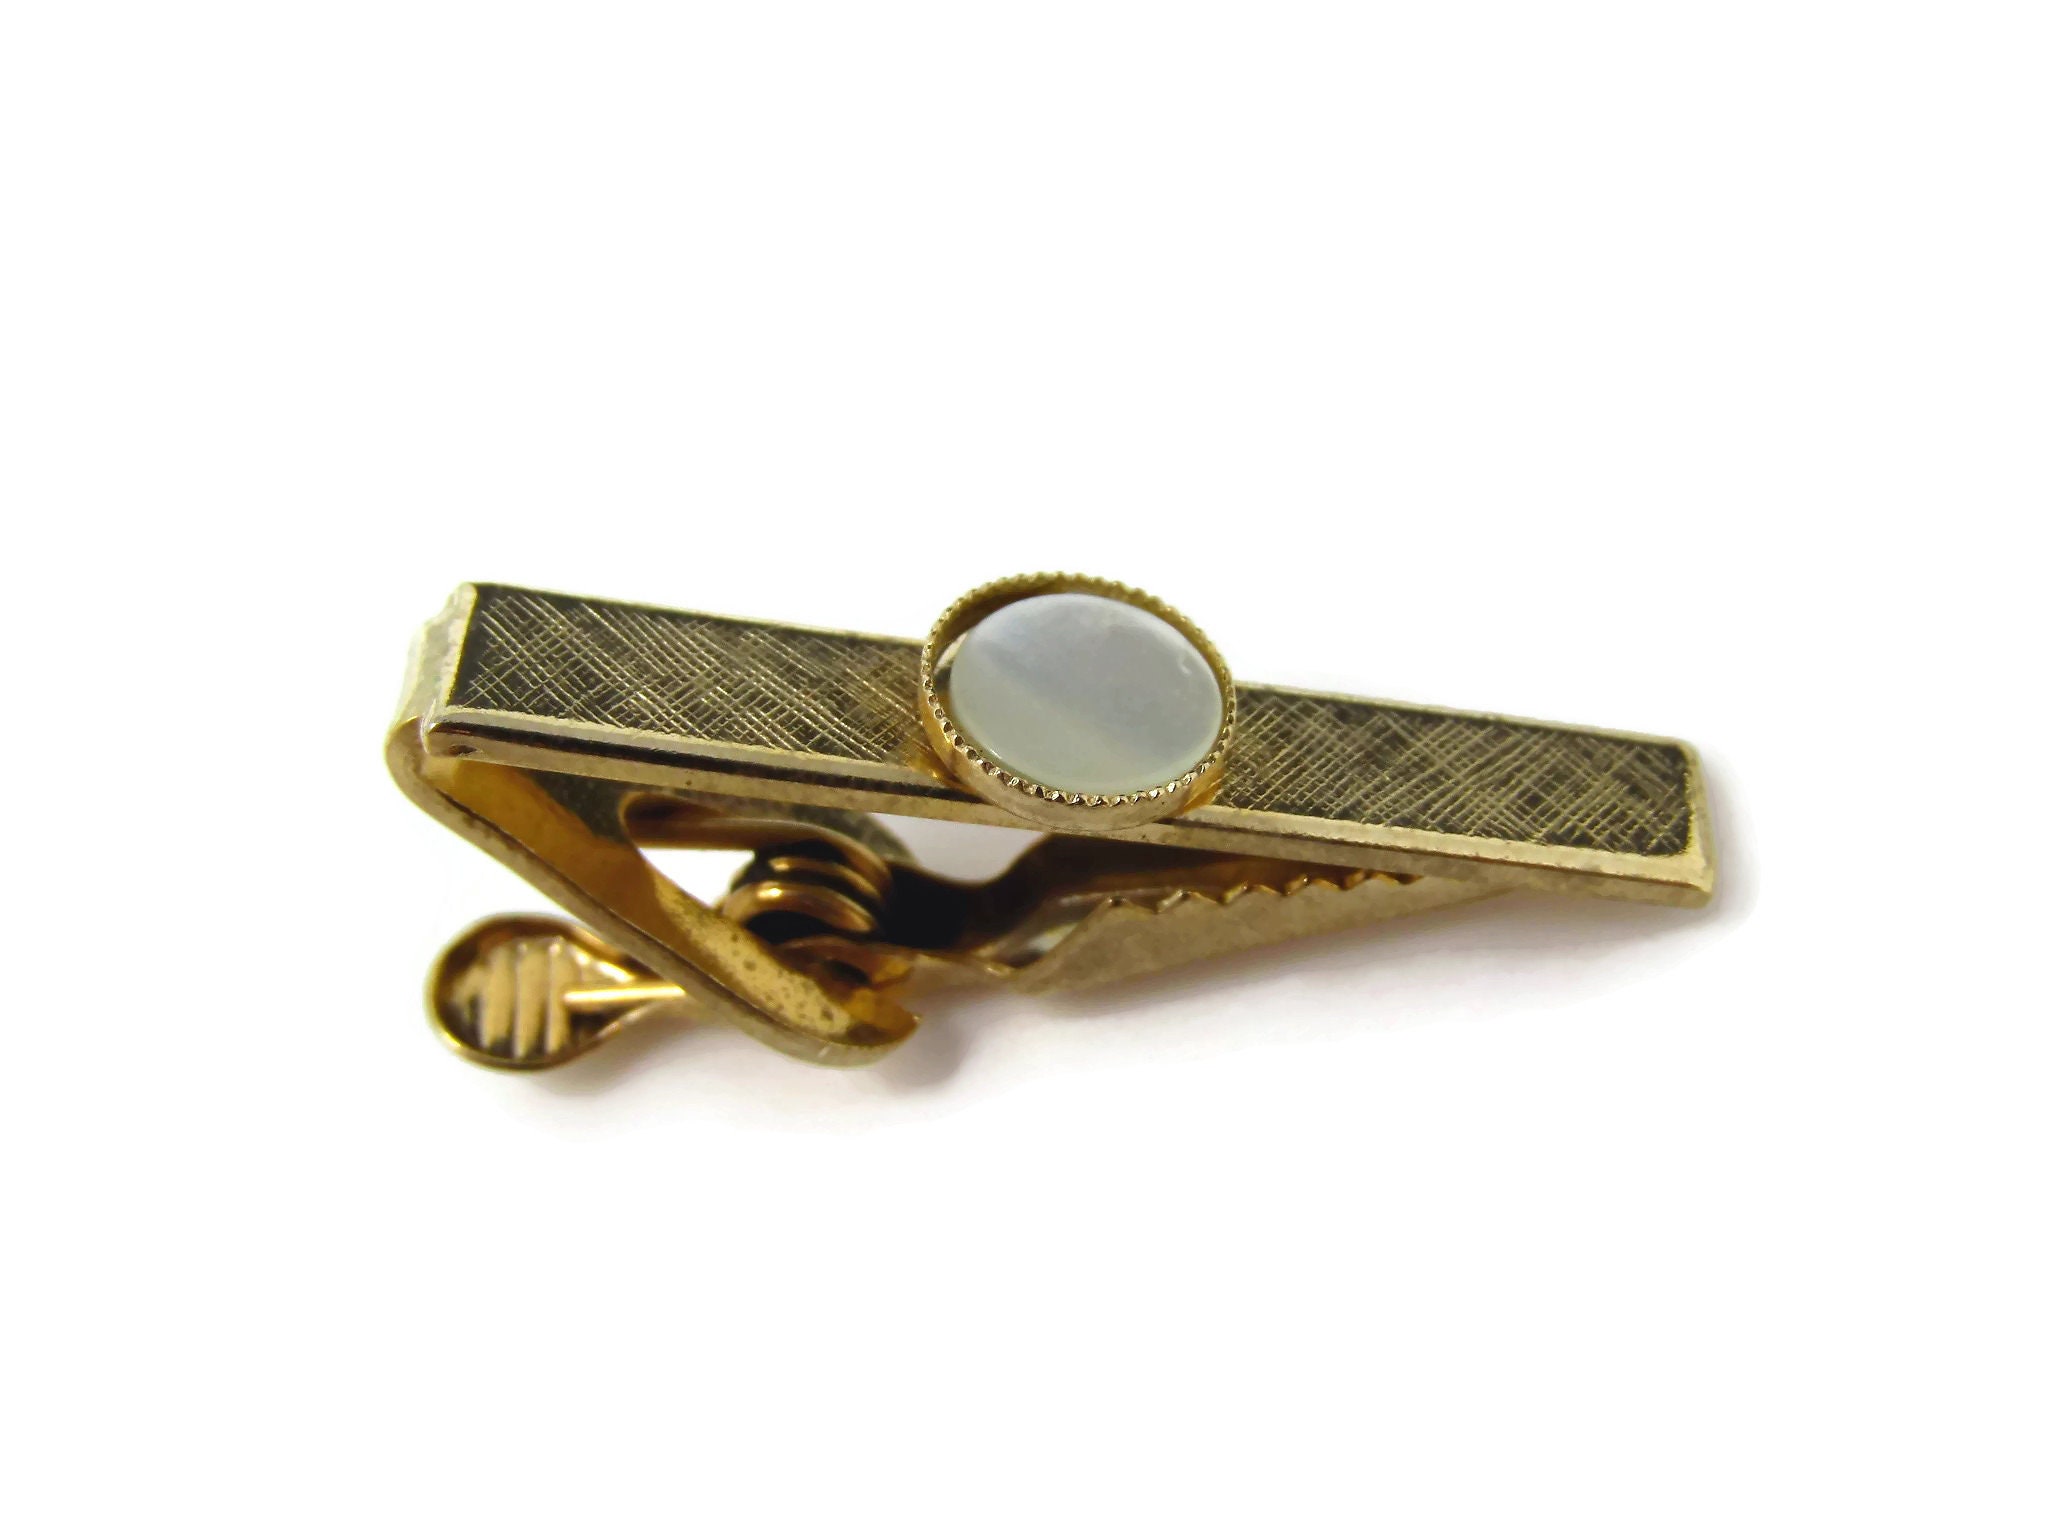 Vintage Tie Clip Tie Bar: Mother of Pearl Center Accent Textured Gold ...